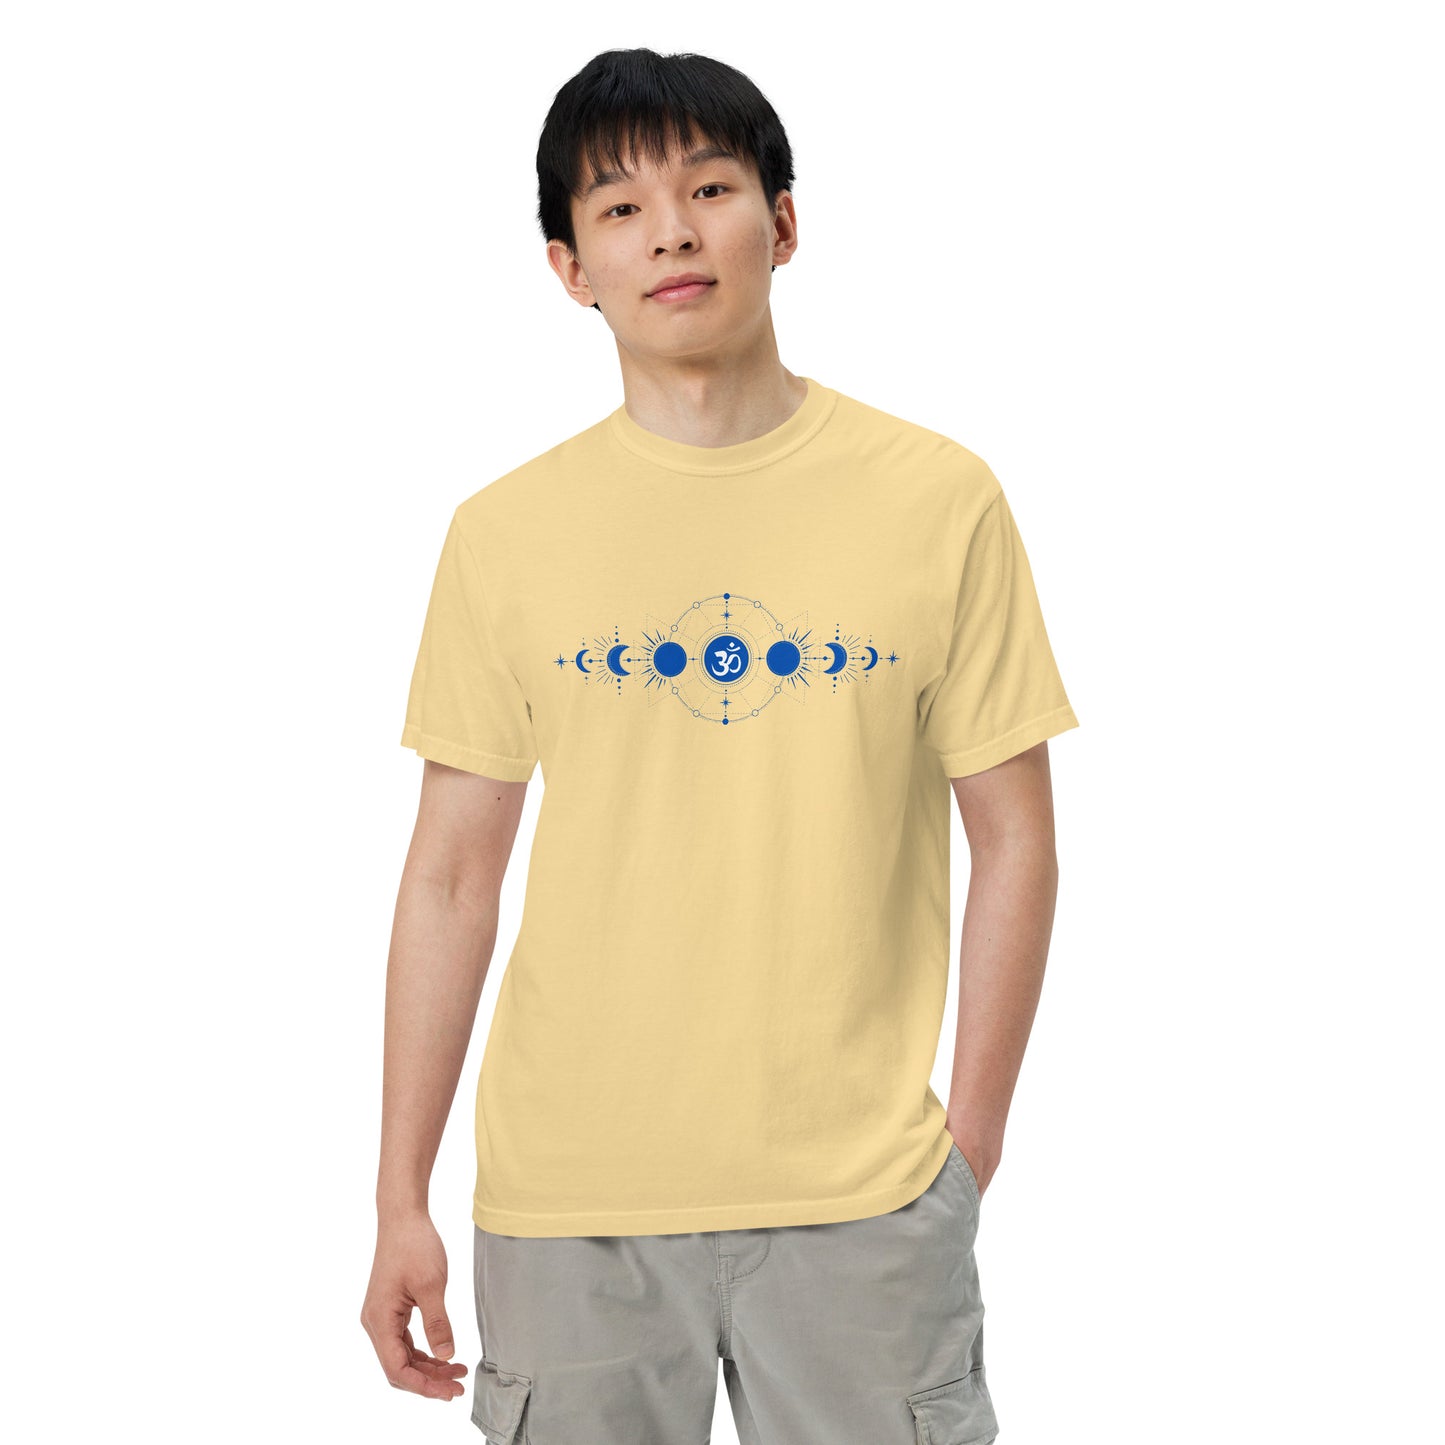 enlightened Moon Phases Men’s garment-dyed heavyweight t-shirt